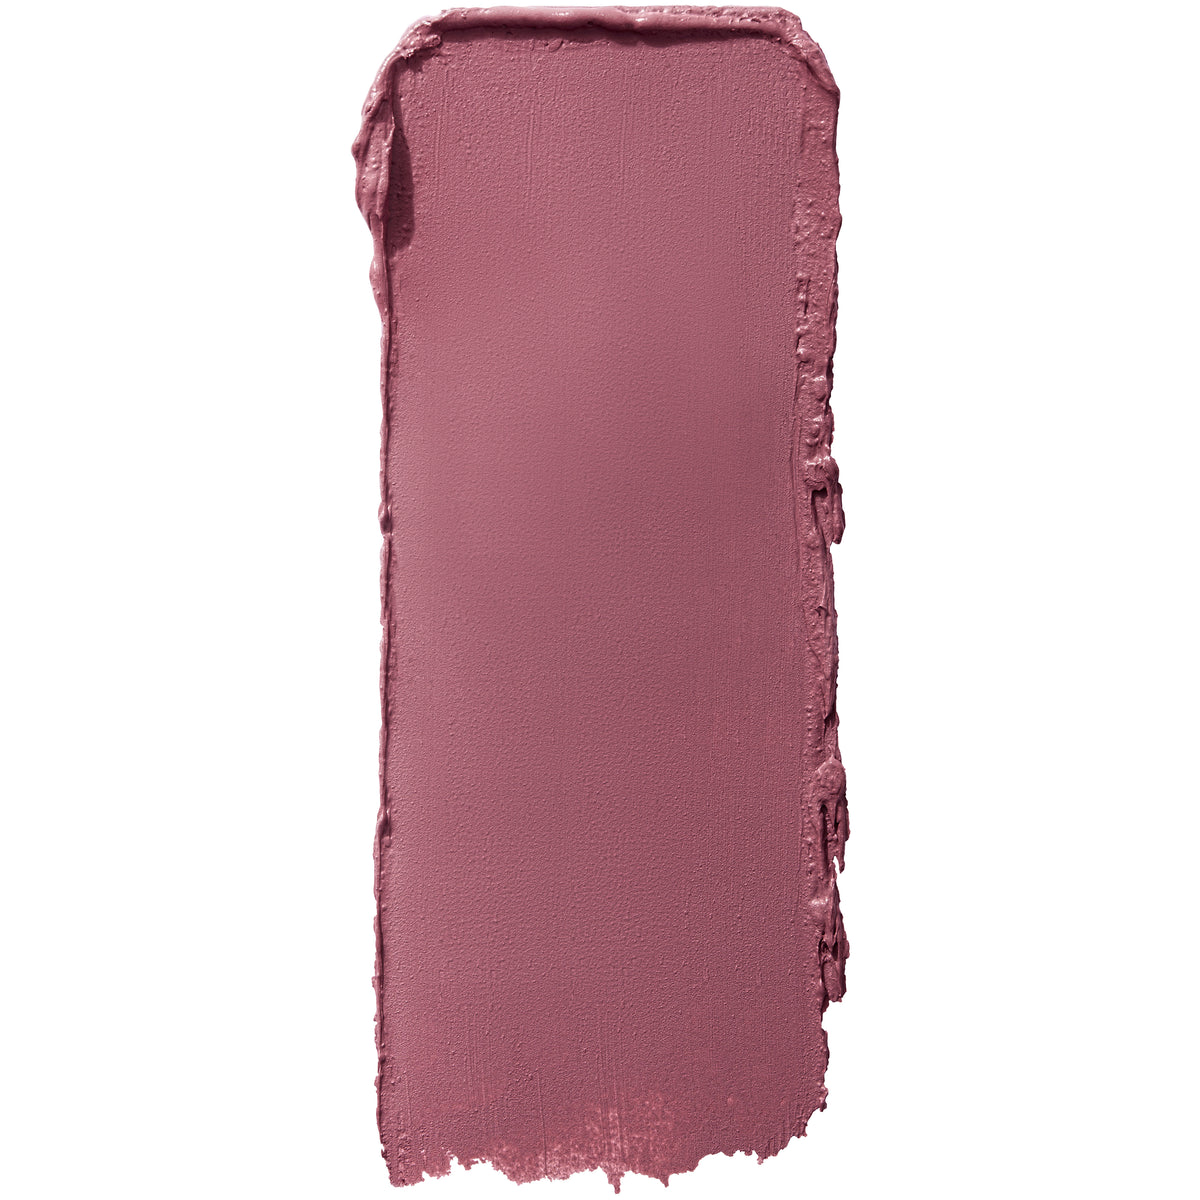 MAYBELLINE Superstay Matte Ink Crayon Lipstick - Stay Exceptional